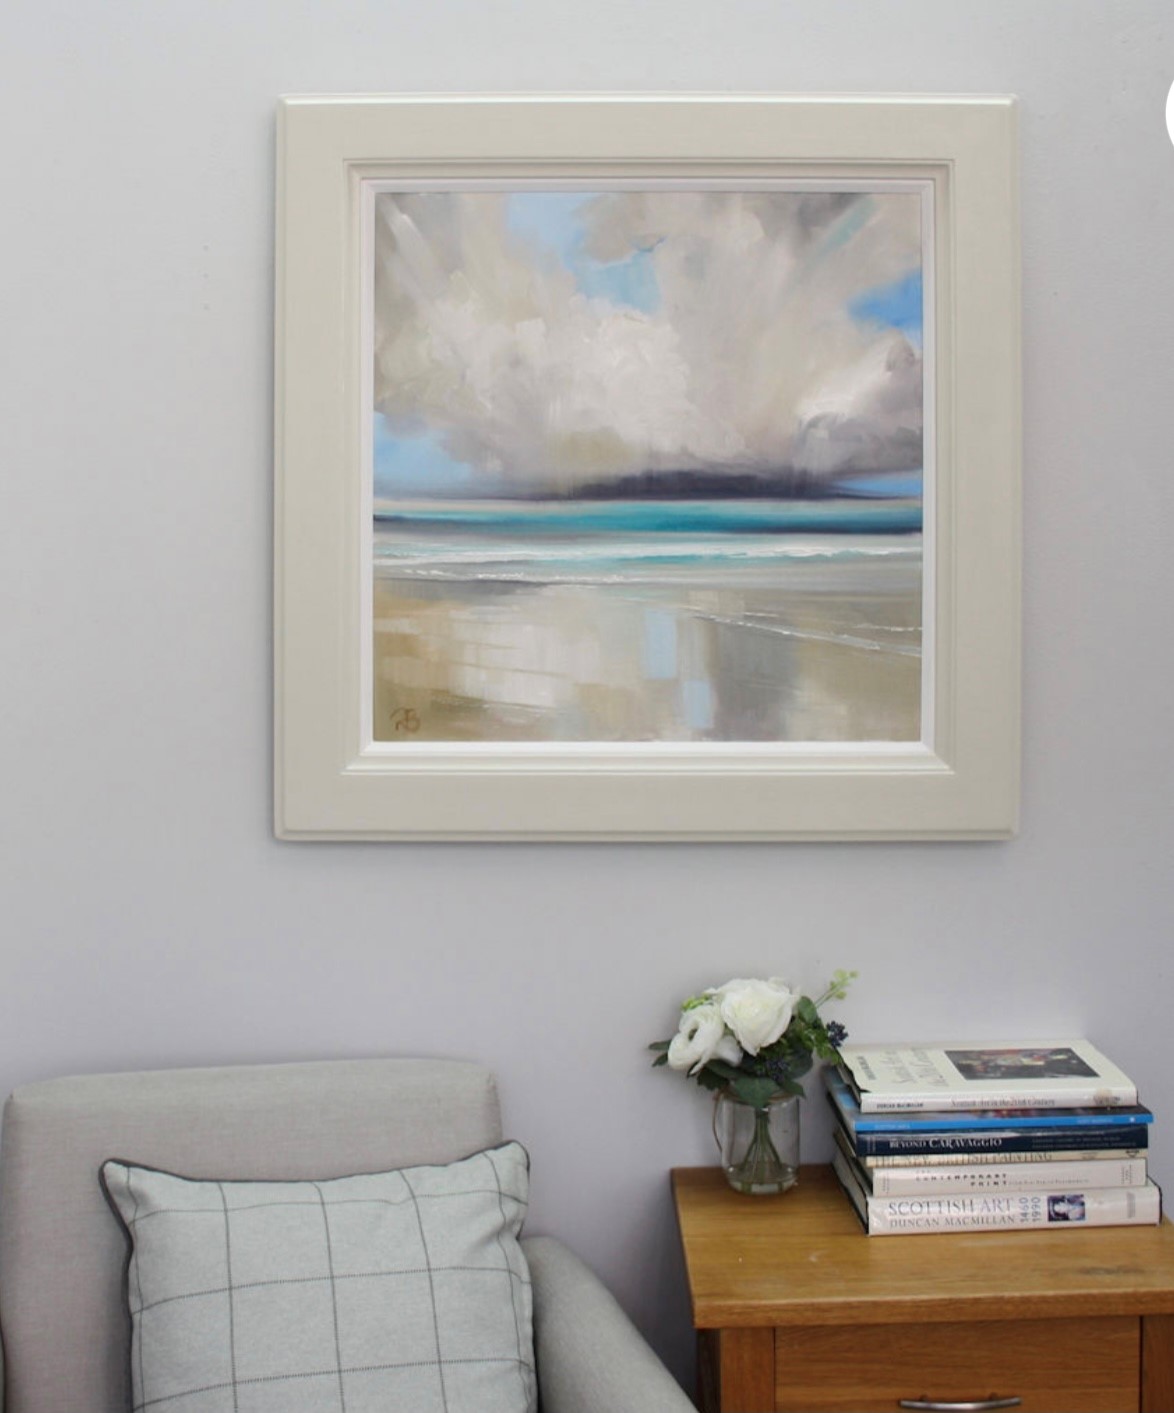 'In love with Arisaig' by artist Rosanne Barr